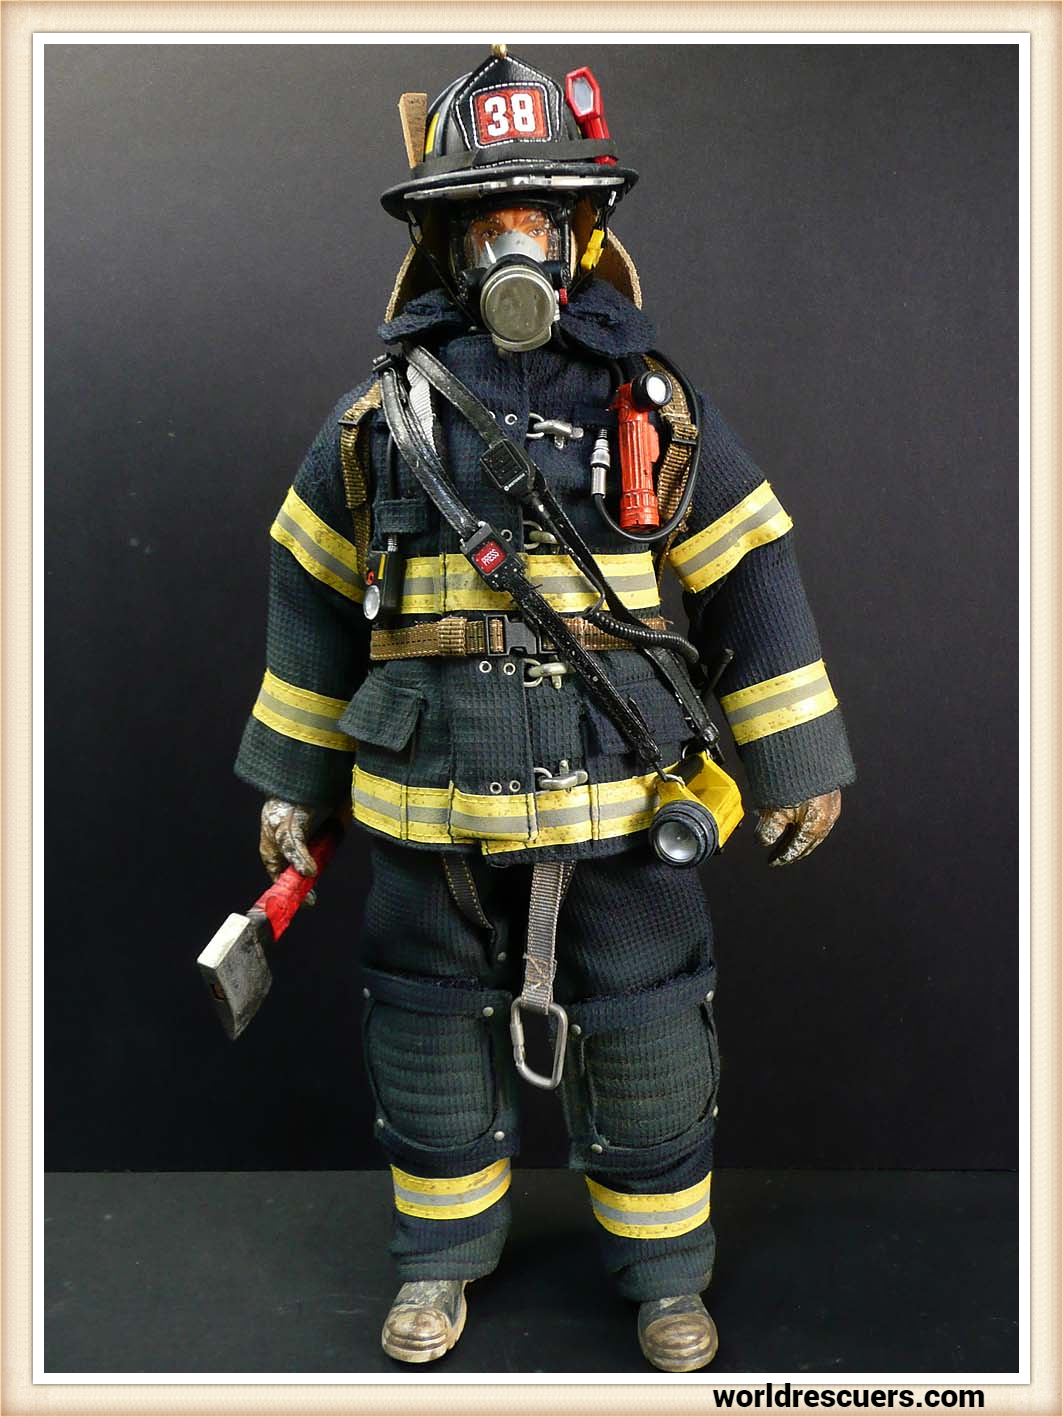 The Firefighter's Turnout Gear